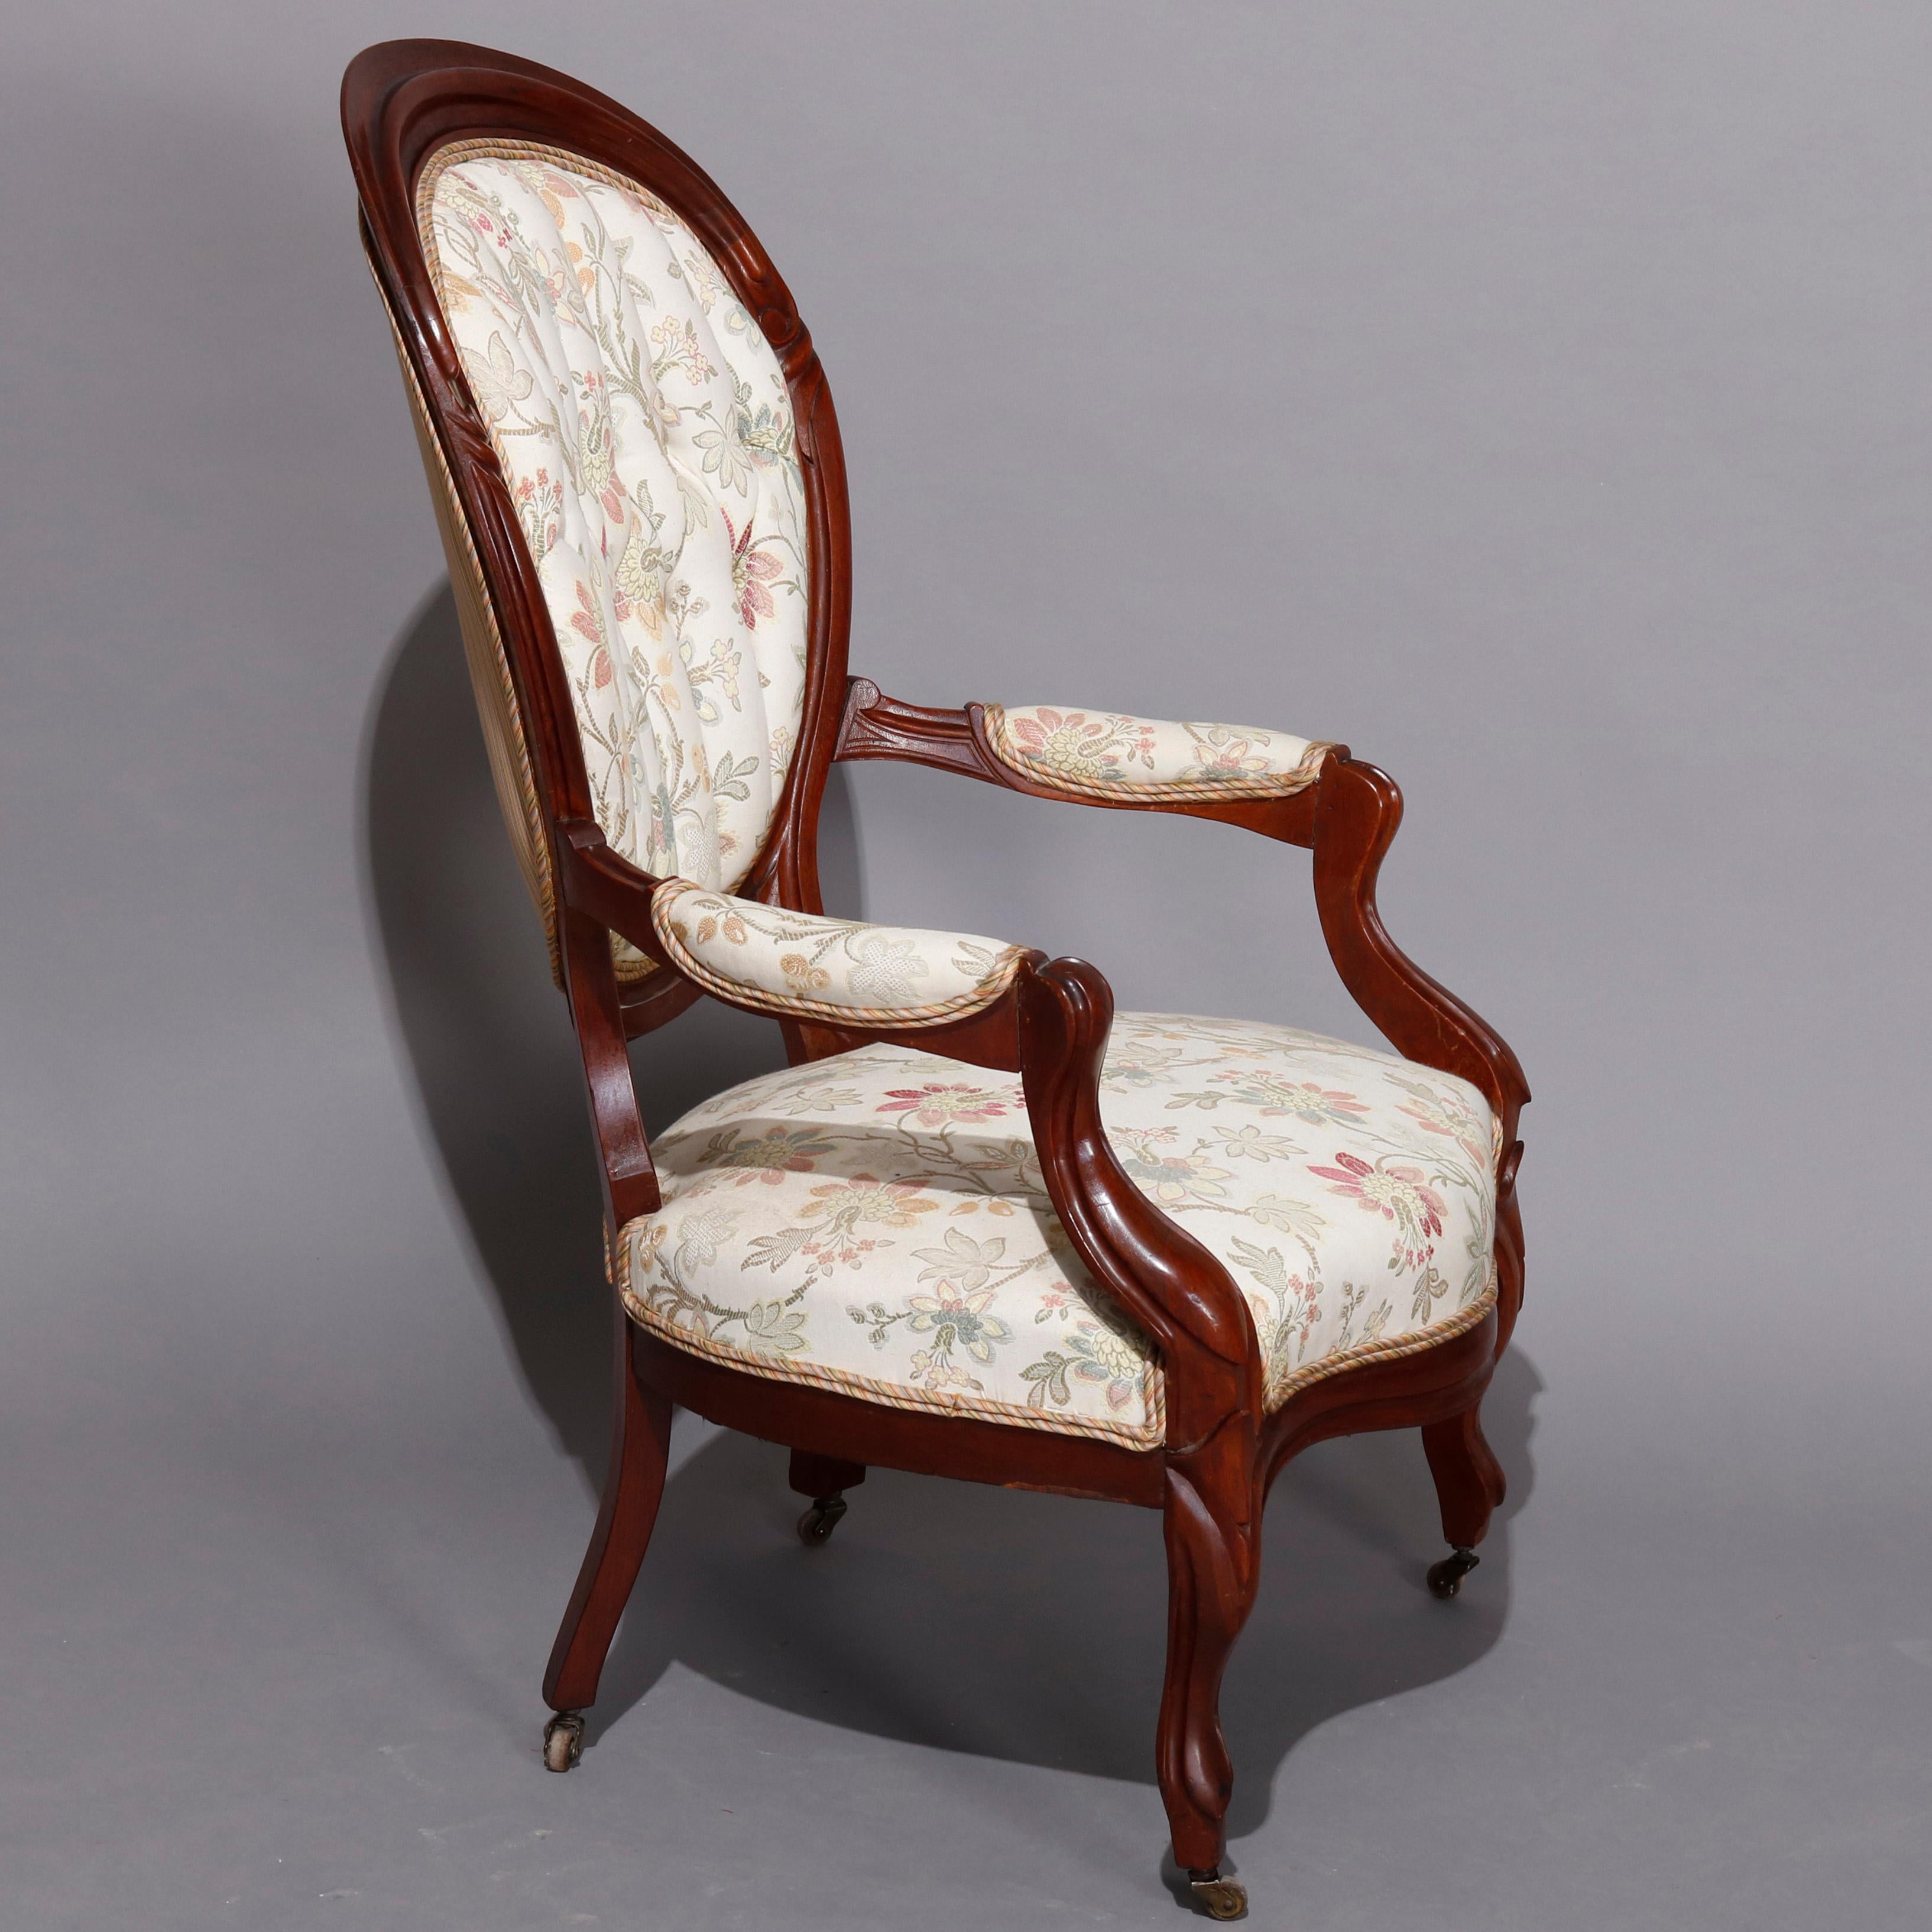 American Antique Victorian Carved Walnut Upholstered Parlor Chair Set, circa 1890